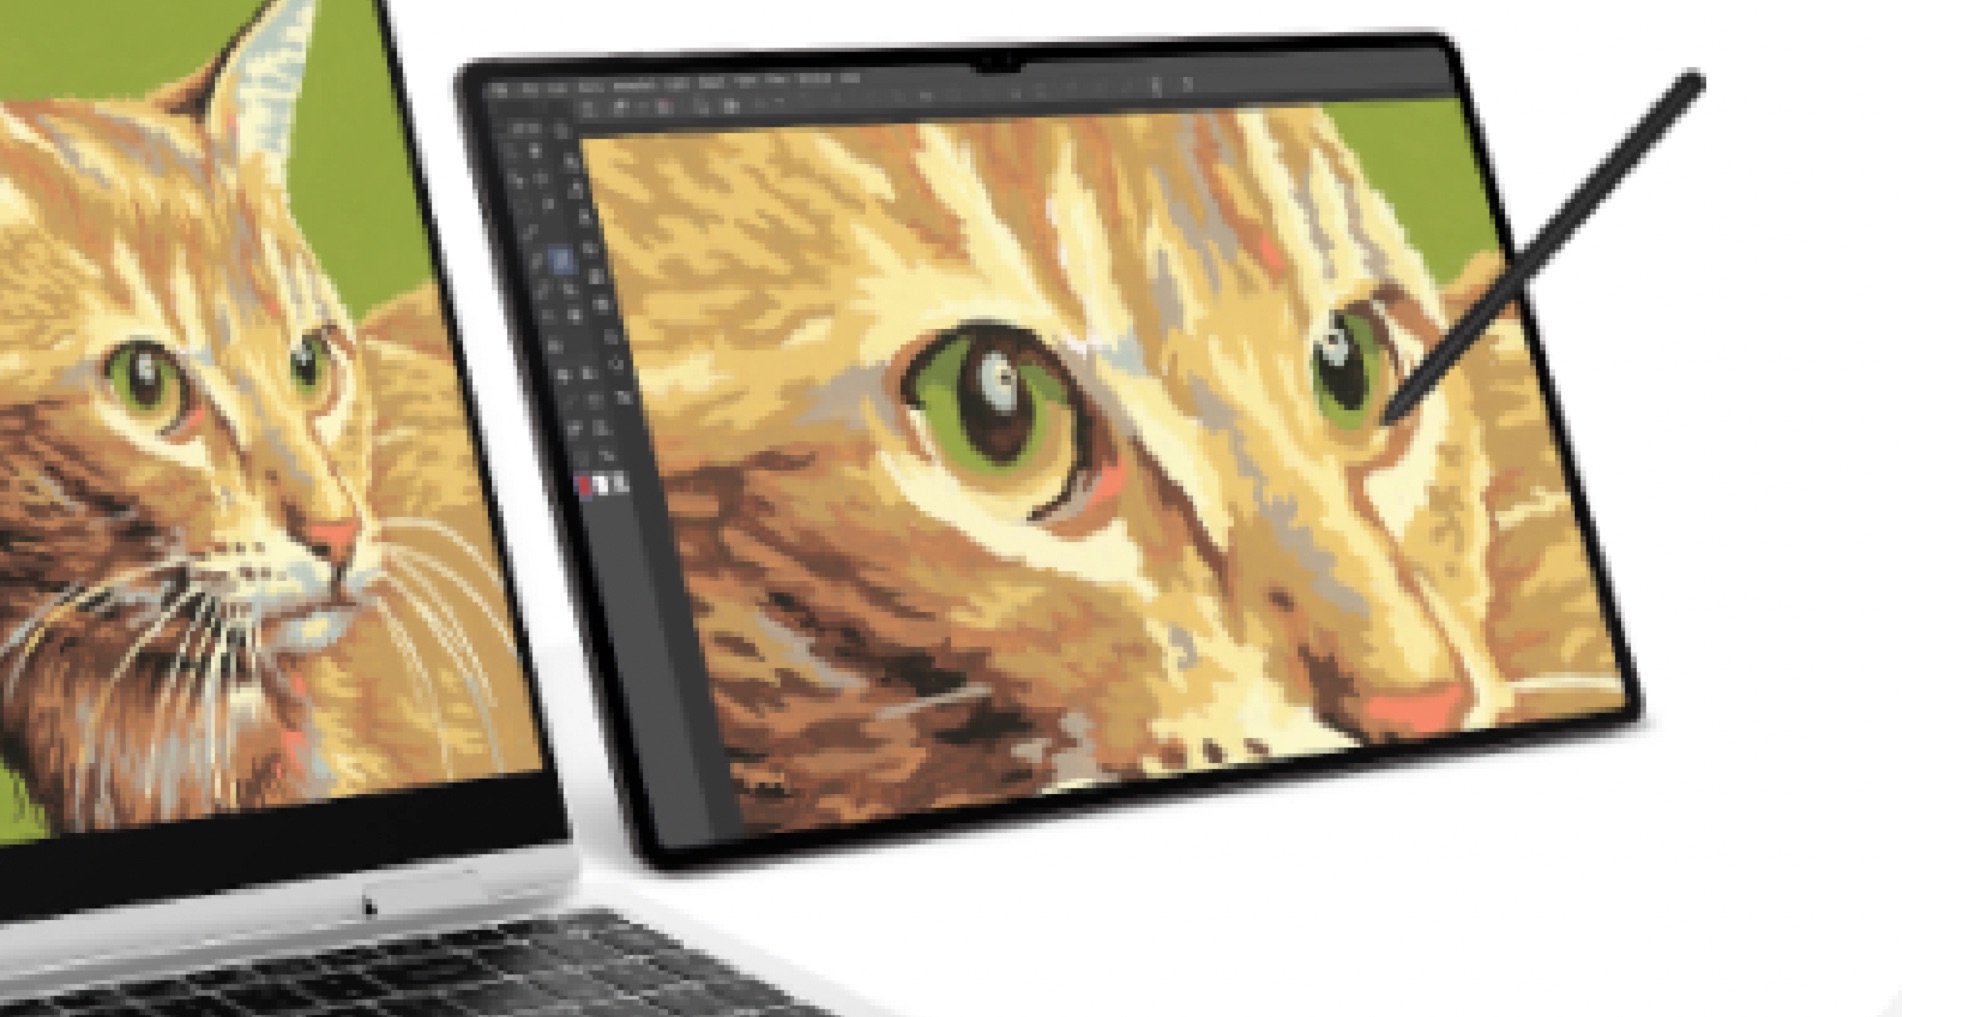 A Galaxy Tab S8 Ultra sits next to an open laptop. The same illustrated image of a cat id displayed across both screens, indicating the tablet is being used as a second screen. An S Pen is angled in a way so that it looks to be illustrating the cat.